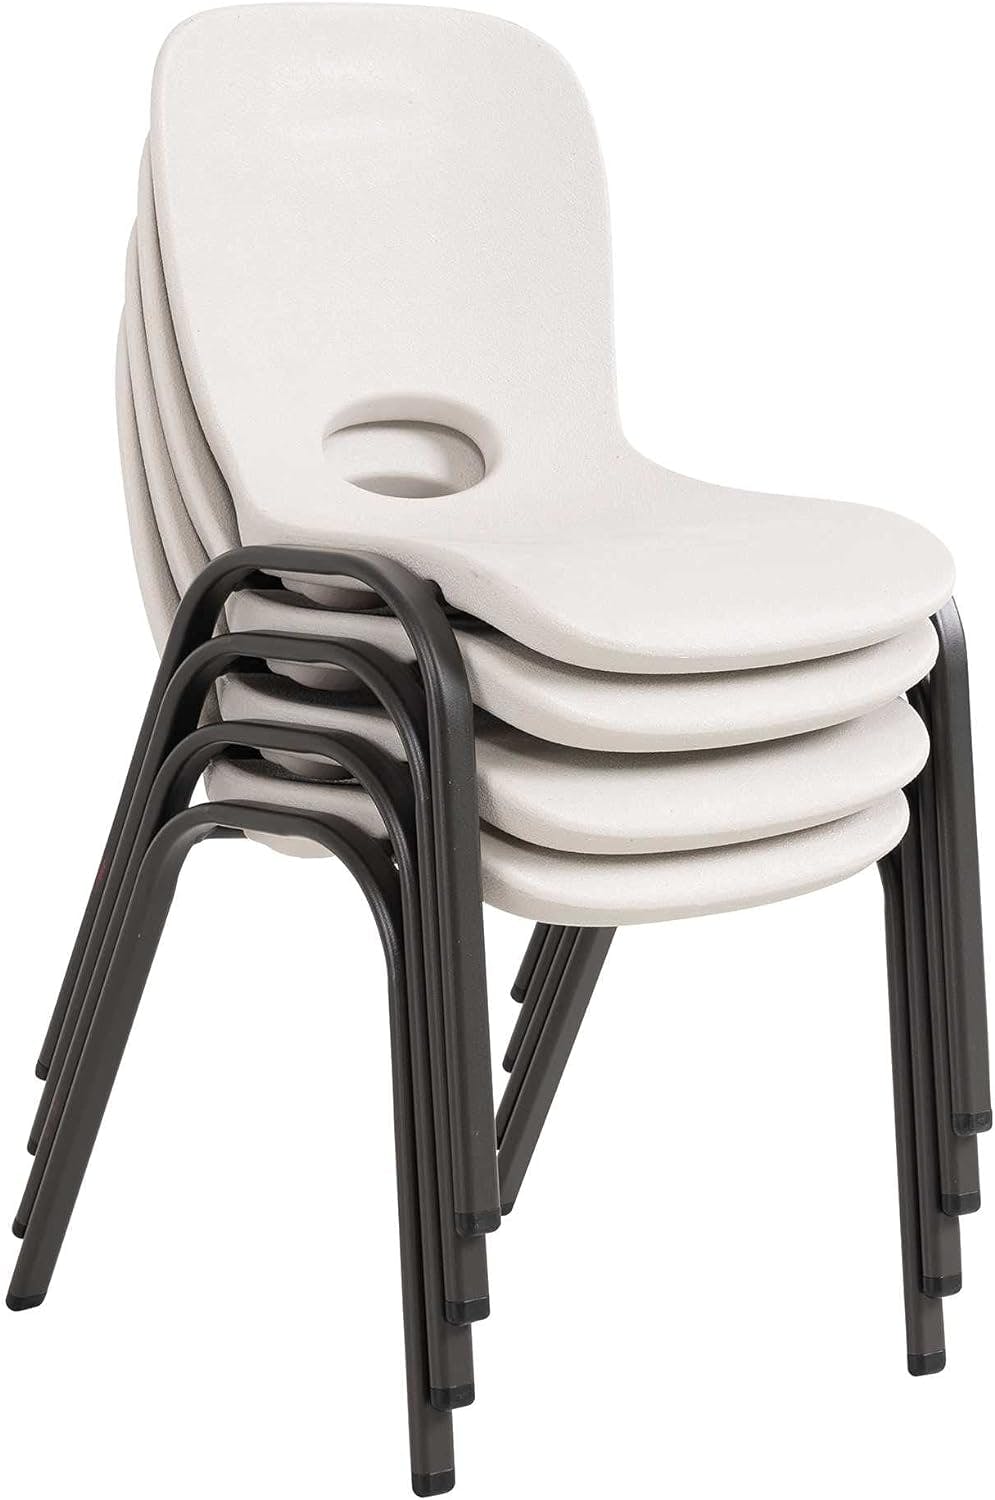 Almond Polyethylene Stackable School Chair for Kids